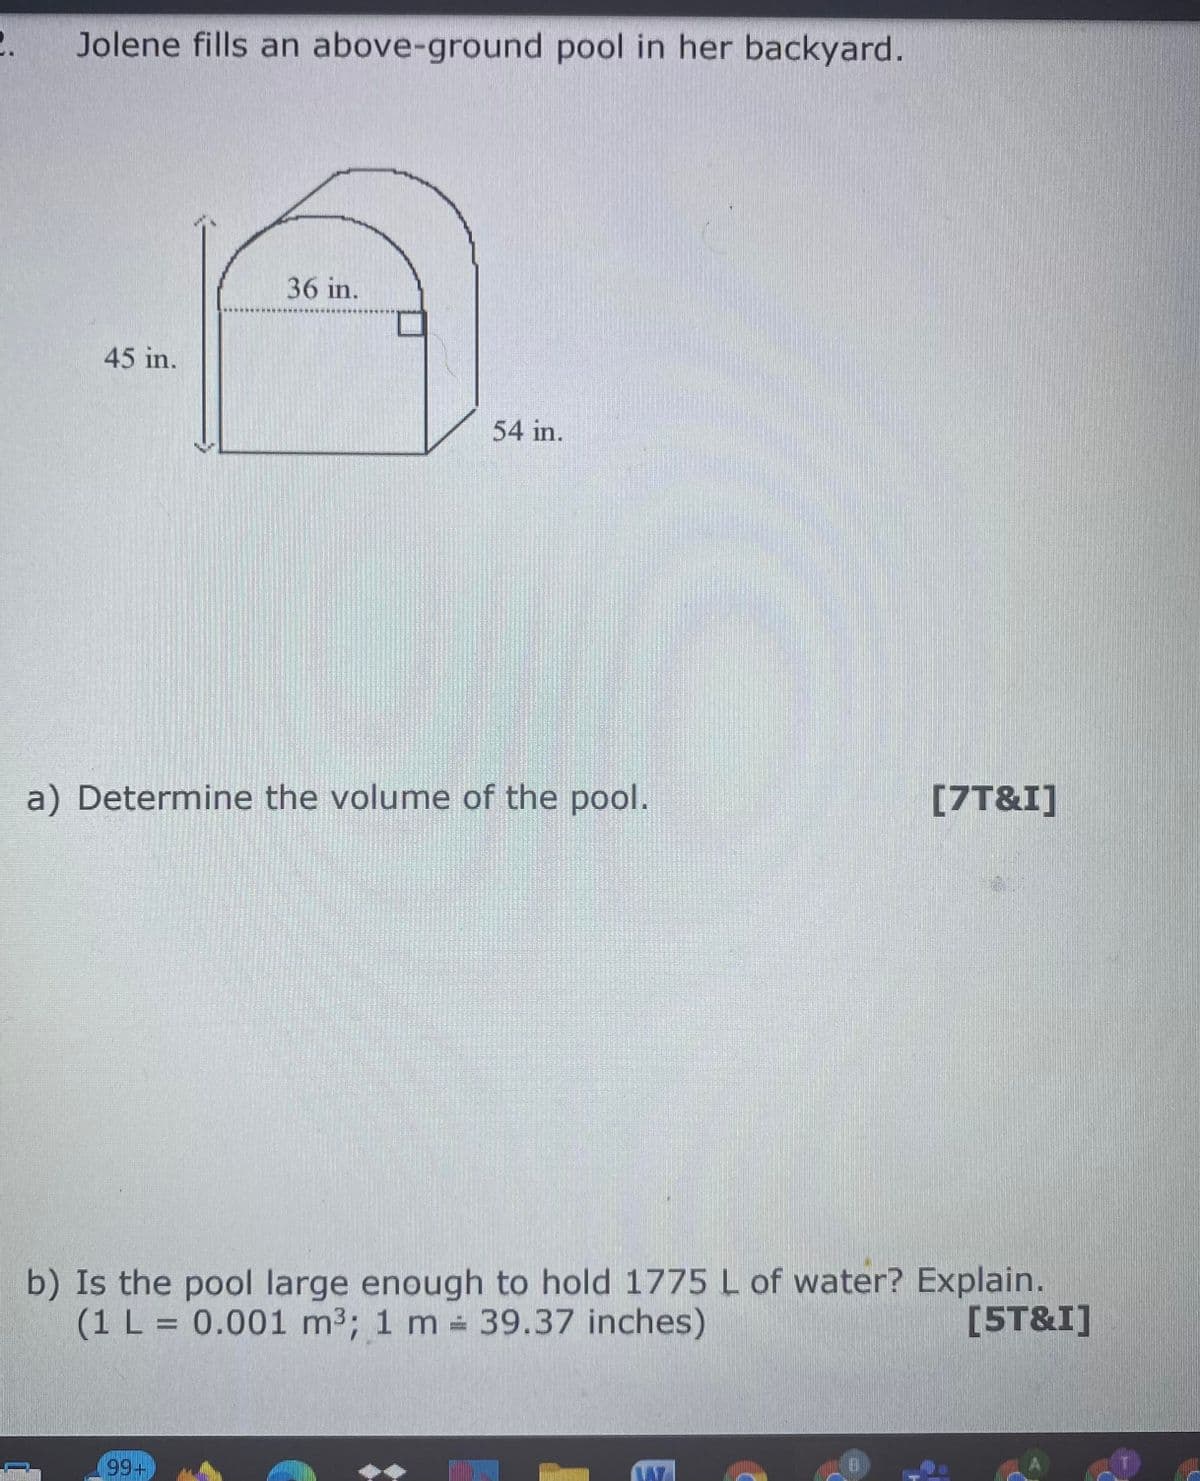 2. Jolene fills an above-ground pool in her backyard.
36 in.
45 in.
54 in.
a) Determine the volume of the pool.
[7T&I]
b) Is the pool large enough to hold 1775 L of water? Explain.
(1 L = 0.001 m3; 1 m 39.37 inches)
[5T&I]
99+
